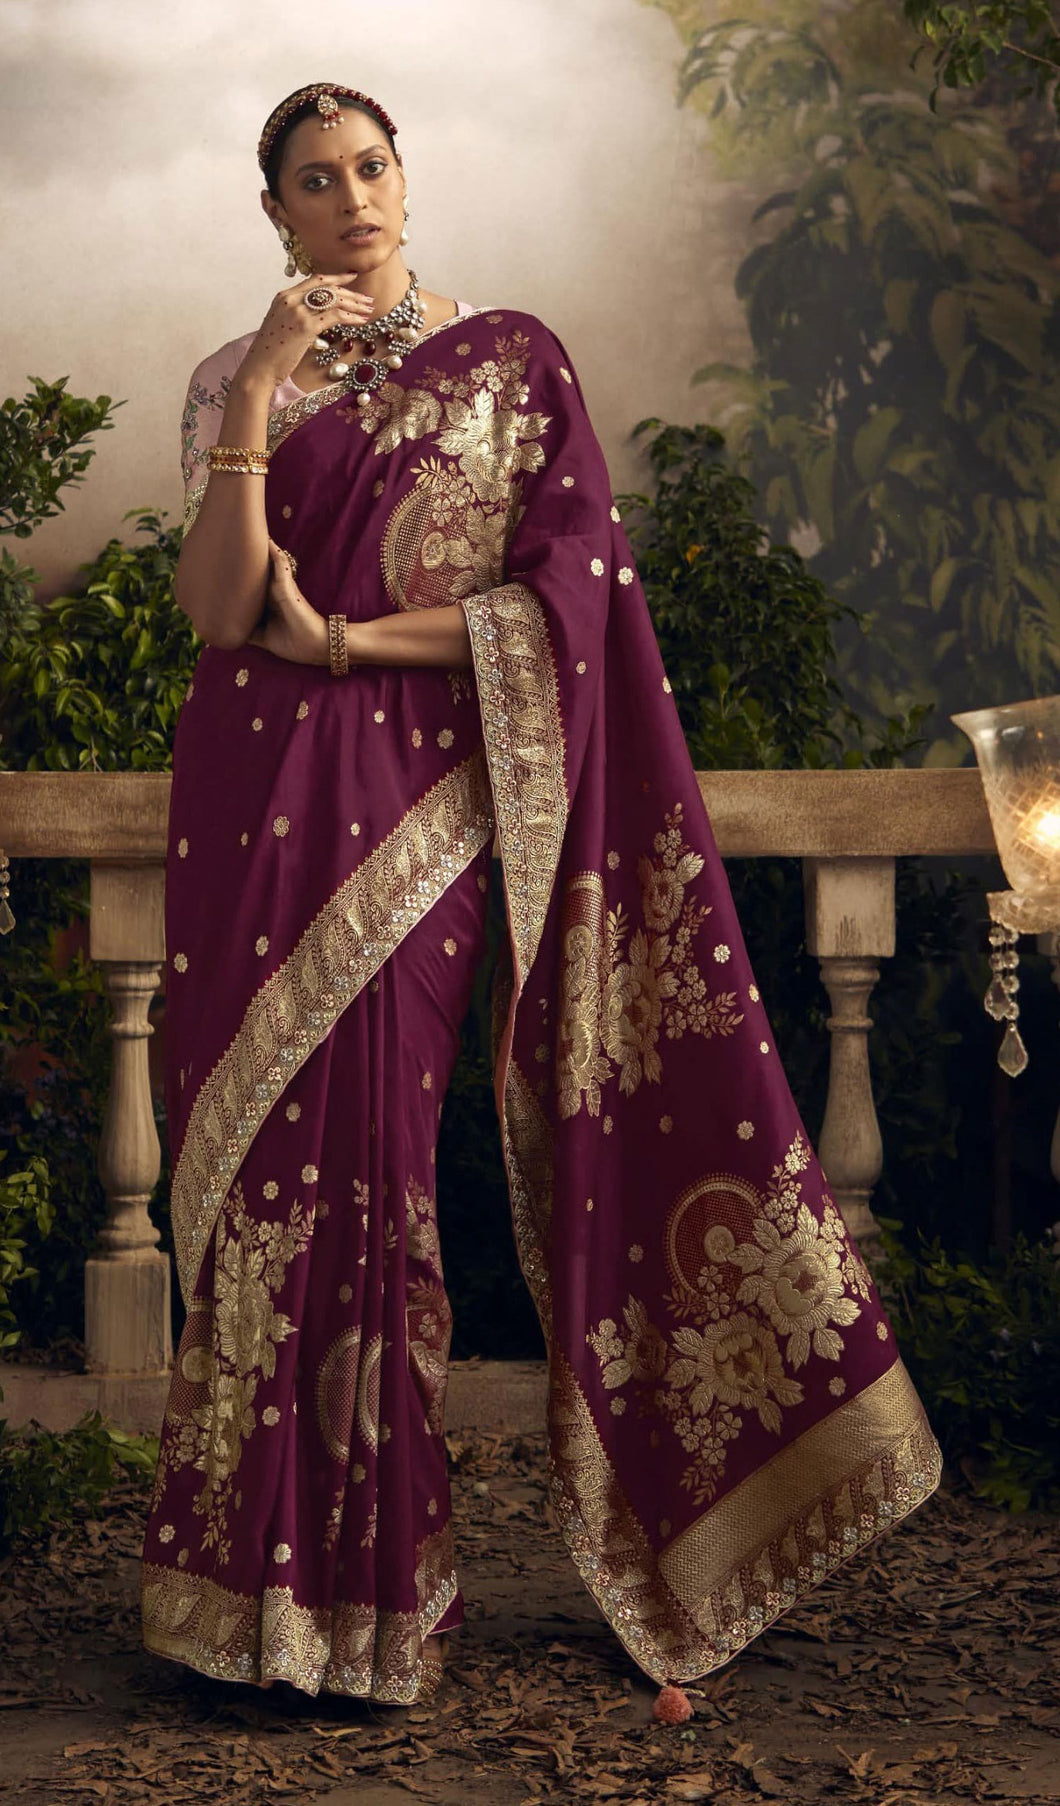 Pure Dola Silk Saree with Embroidery on Border